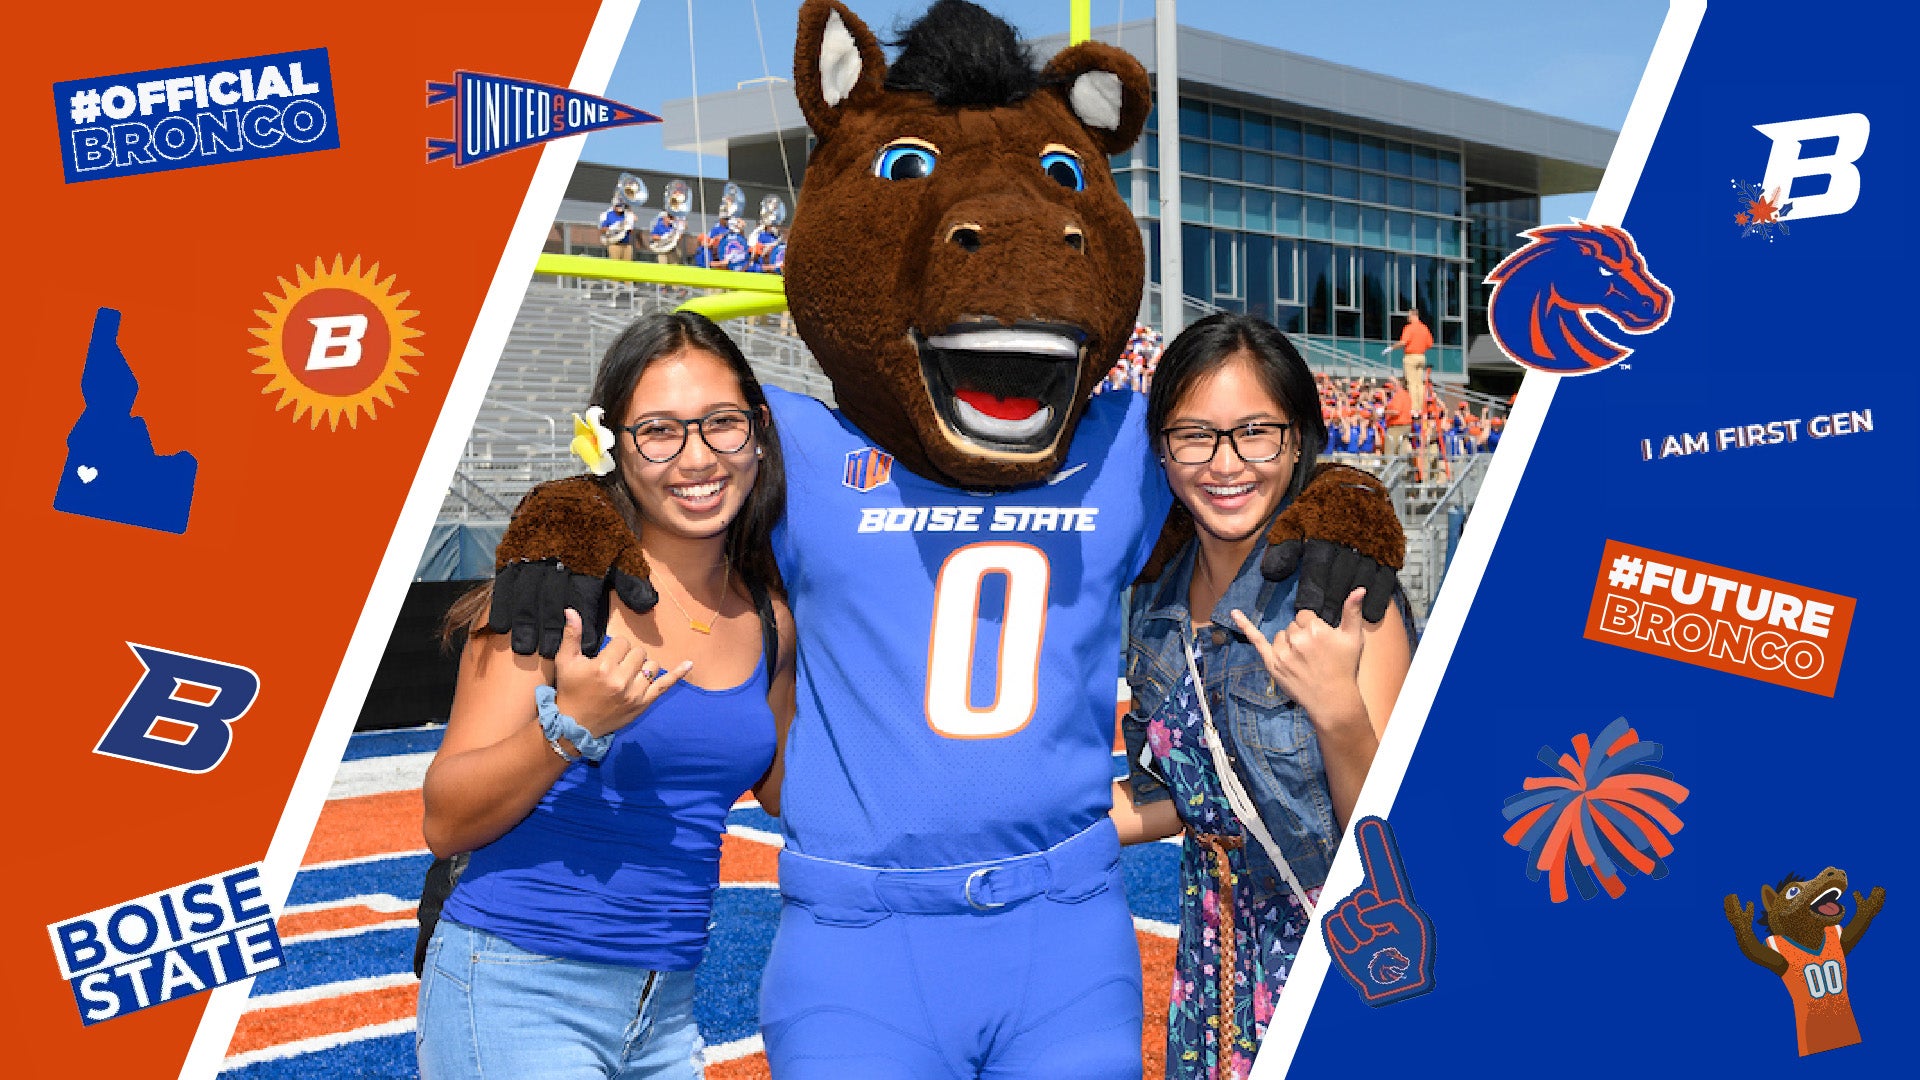 Students pose with Buster Bronco, and the image is overlaid with various Boise State themed flair.